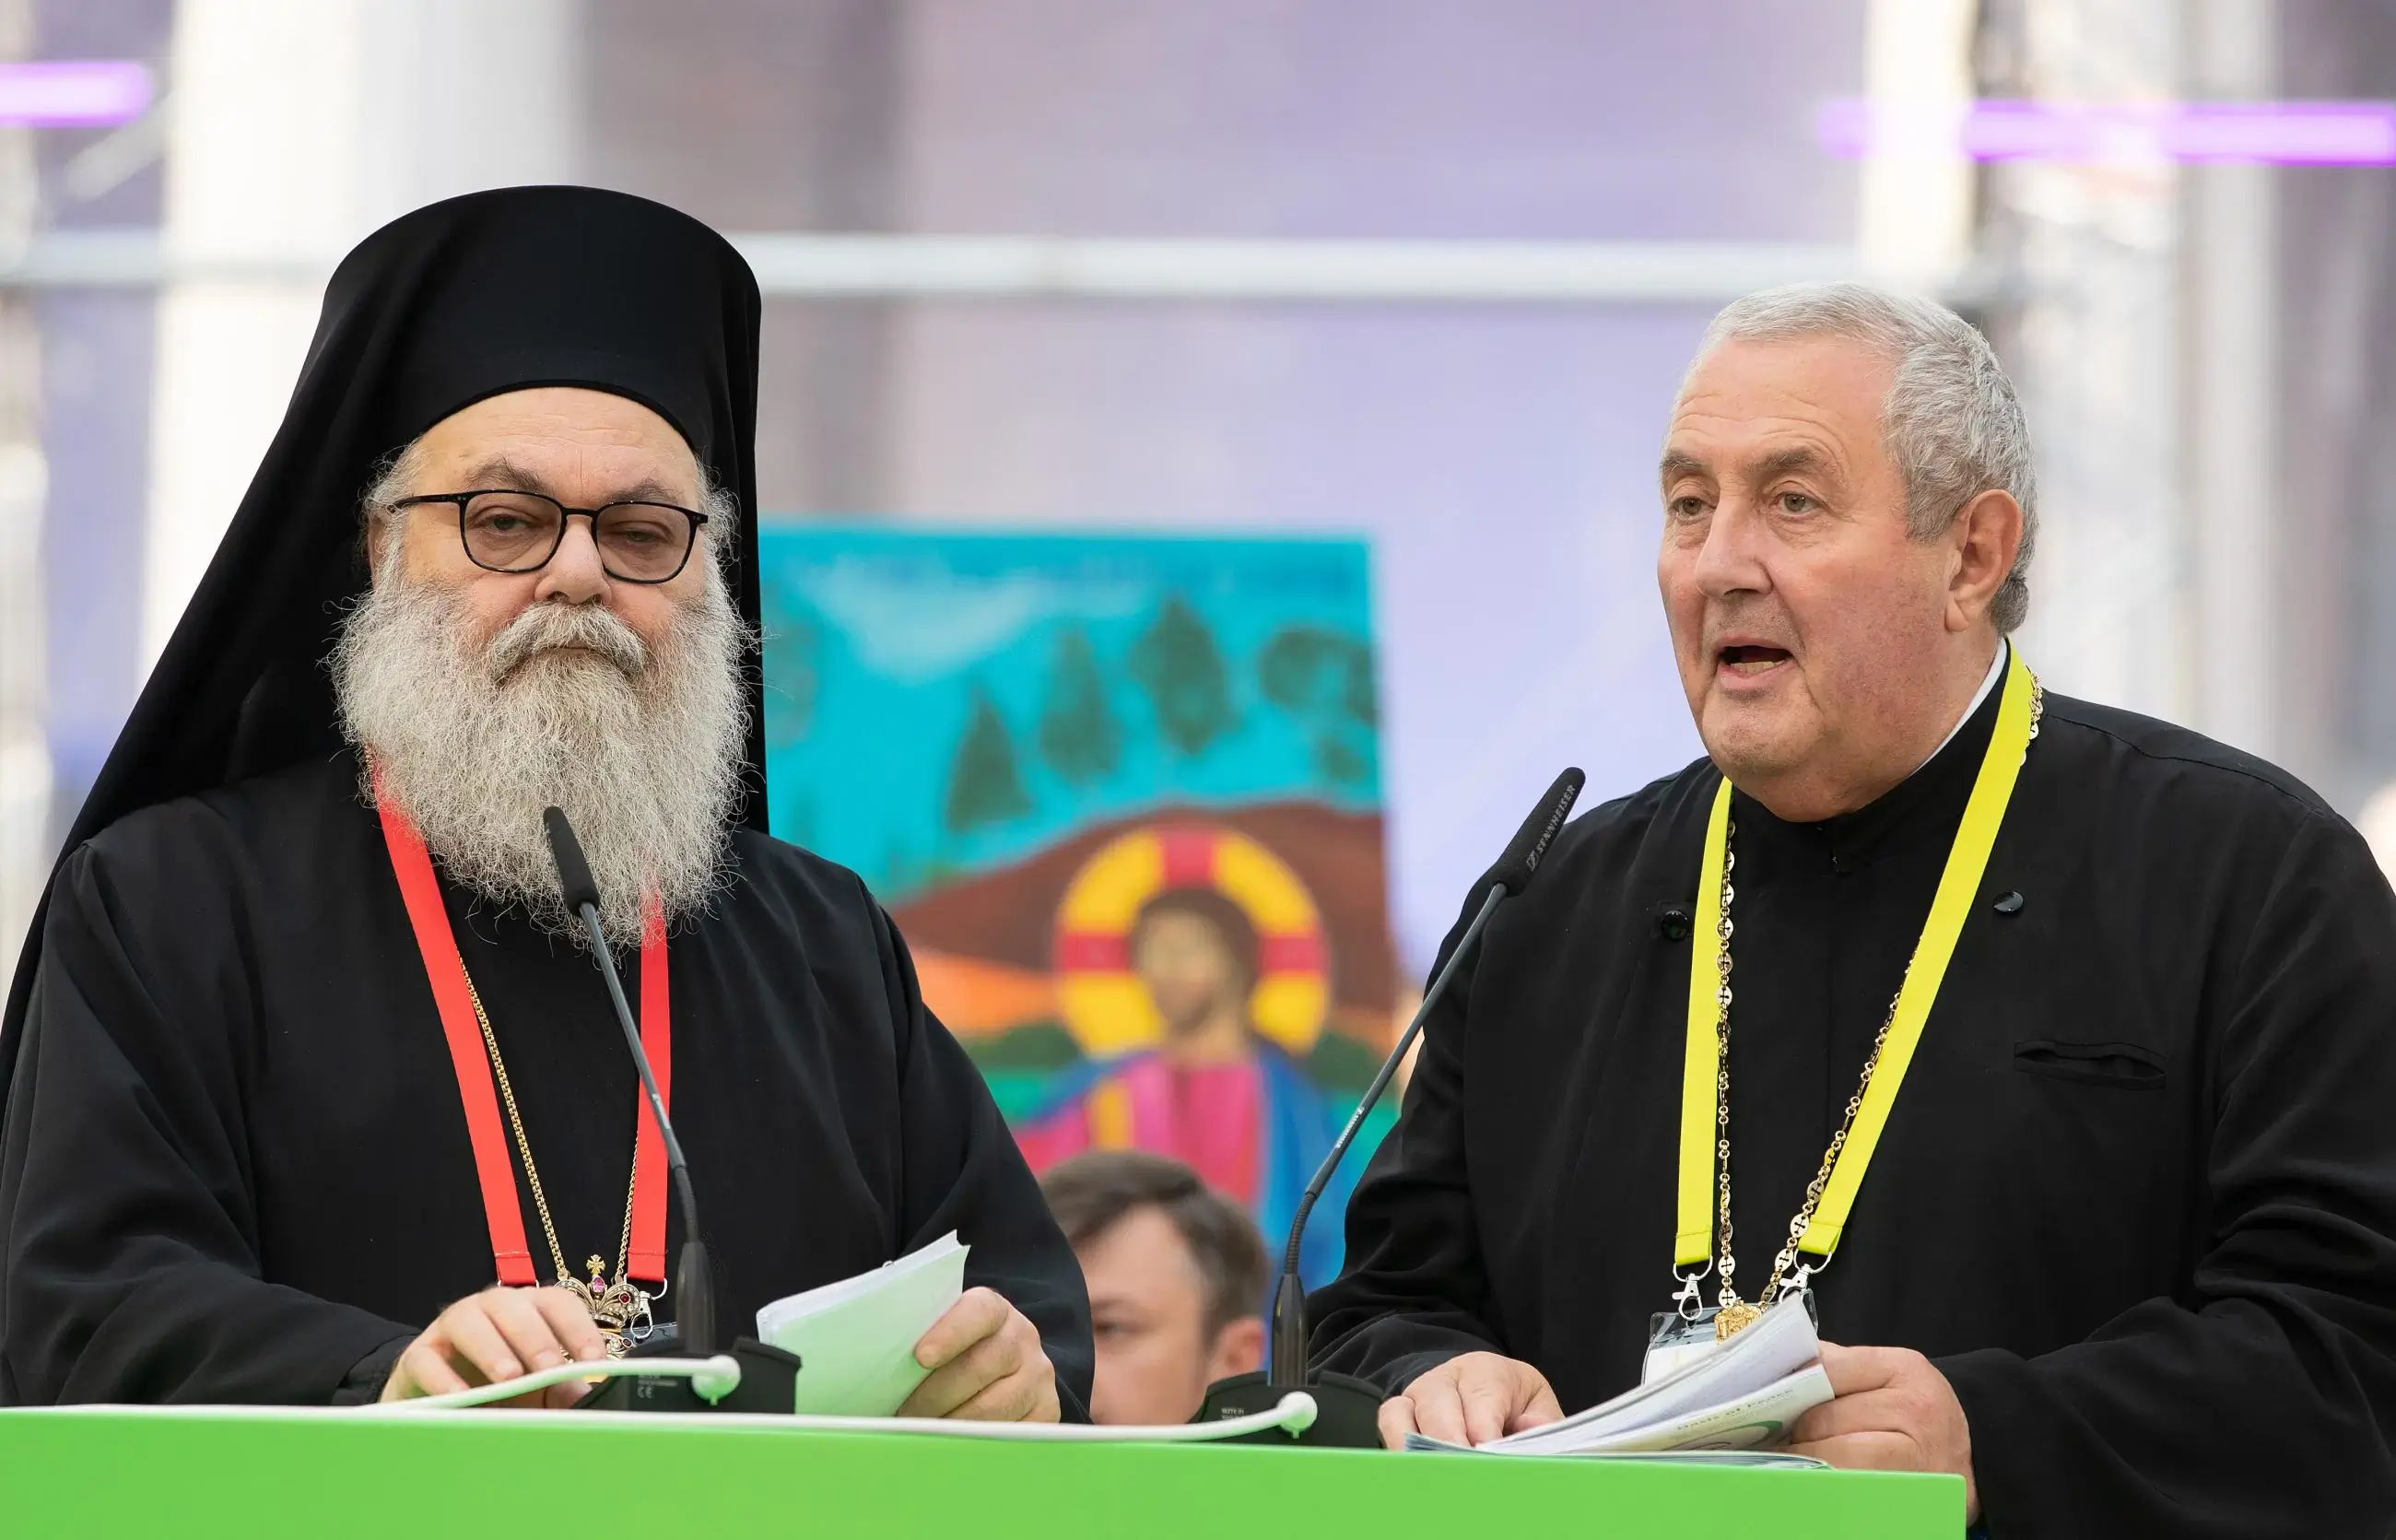 The Rev. Dr. Ioan Sauca (right) introduces John X, Patriarch of Antioch and all the East, who gave the homily during the opening prayer service at the World Council of Churches' 11th Assembly in Karlsruhe, Germany. The assembly takes place August 31 to September 8 under the theme 'Christ's Love Moves the World to Reconciliation and Unity'